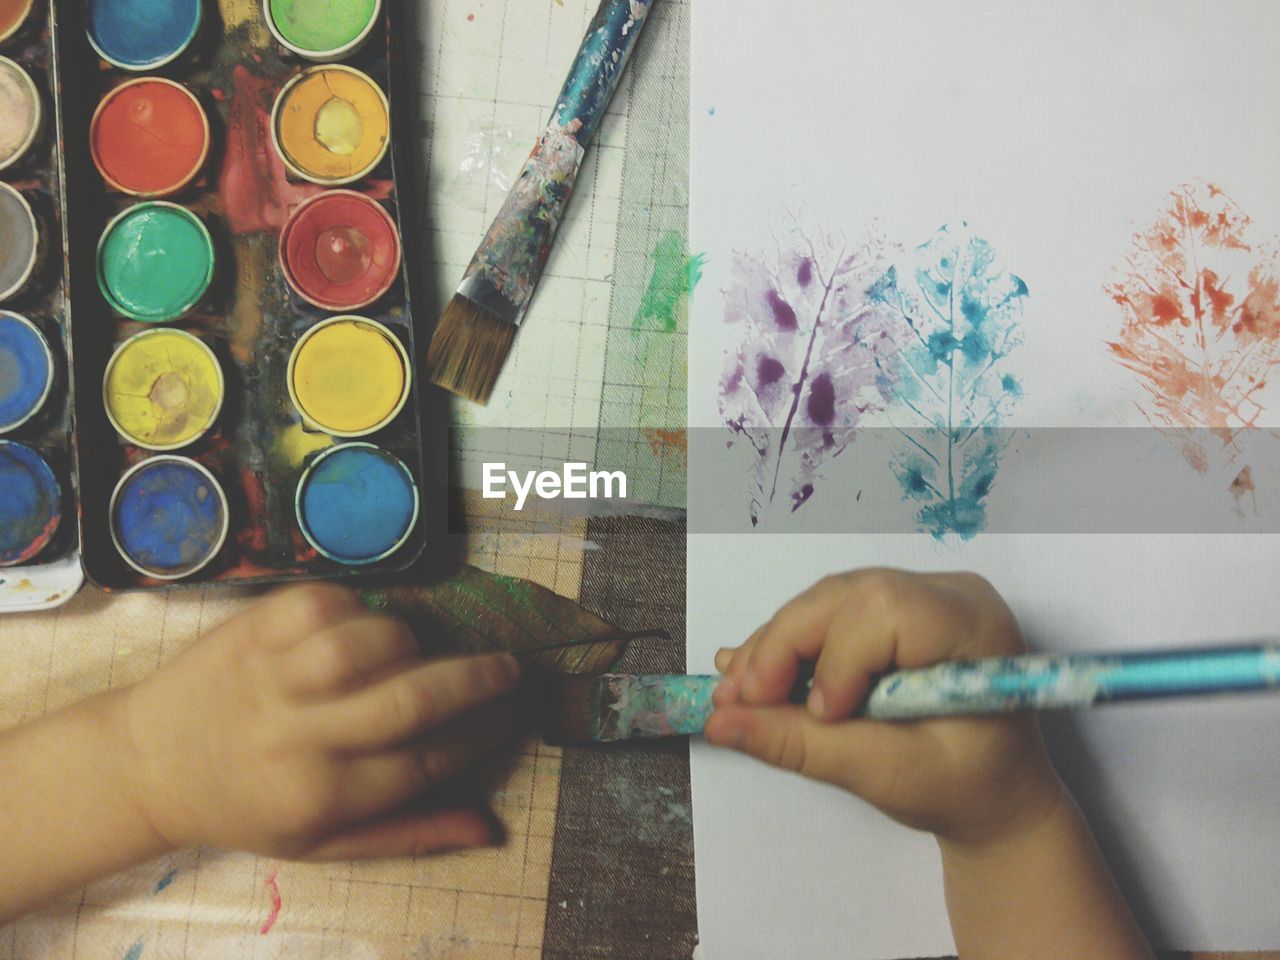 A child painting with watercolors